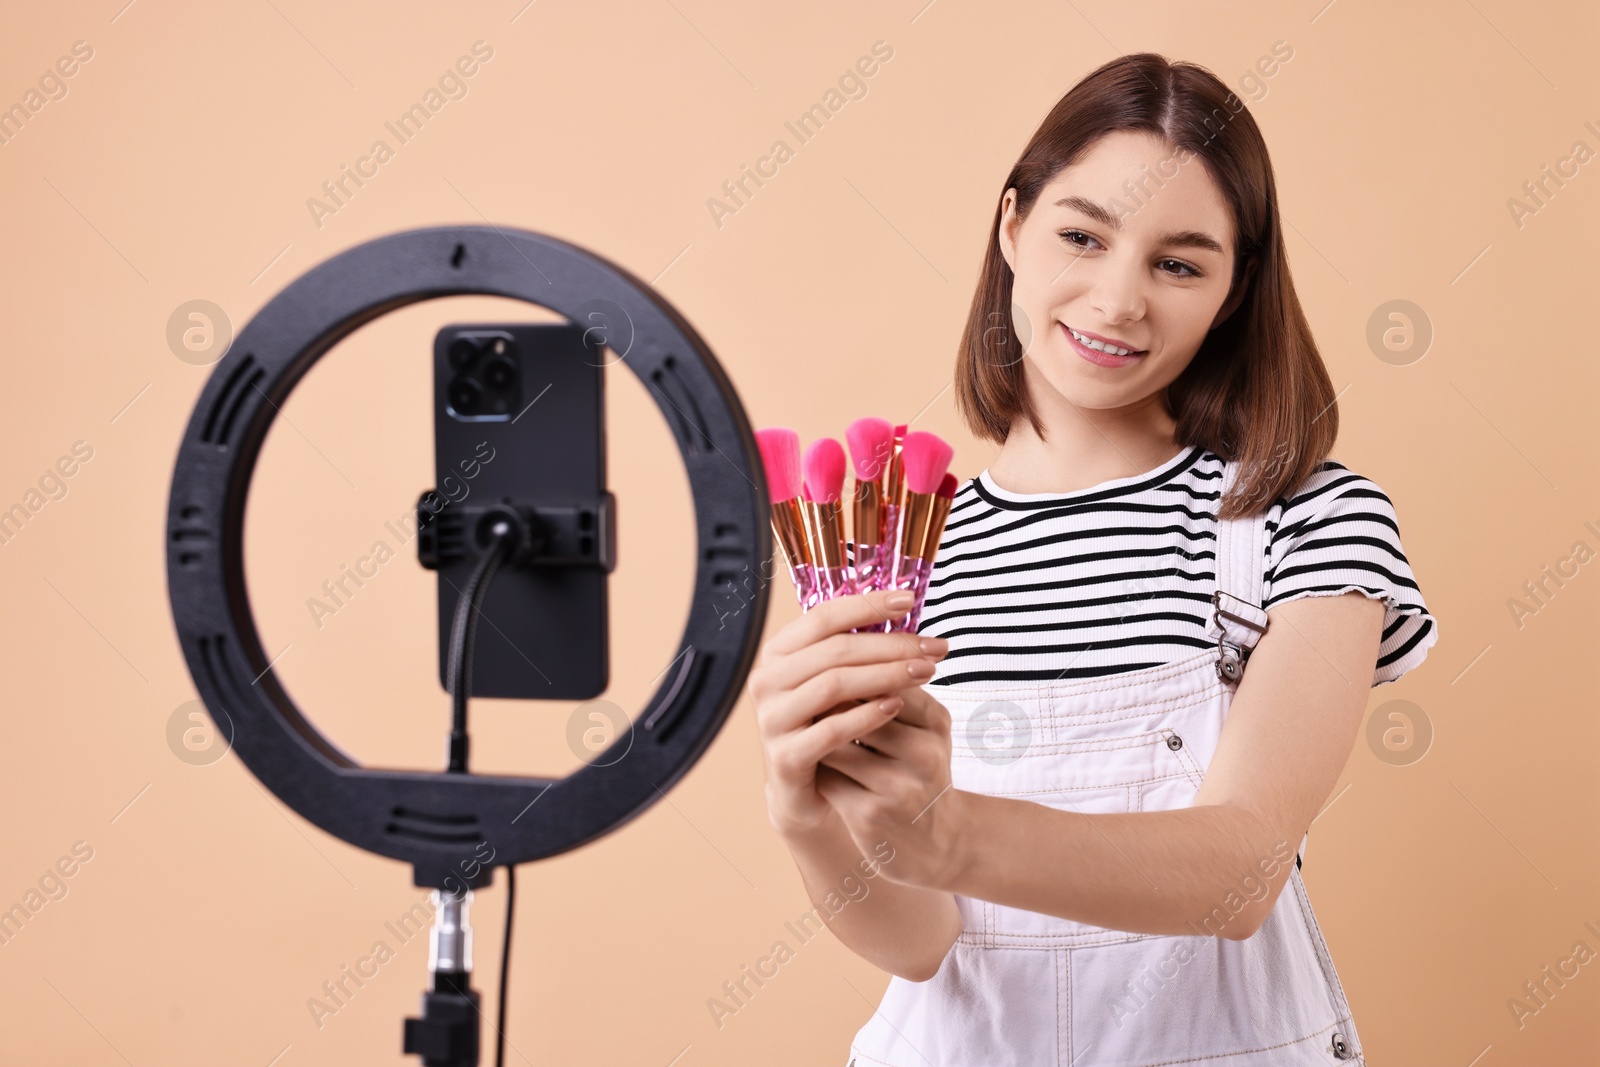 Photo of Beauty blogger reviewing makeup brushes and recording video with smartphone and ring lamp on beige background